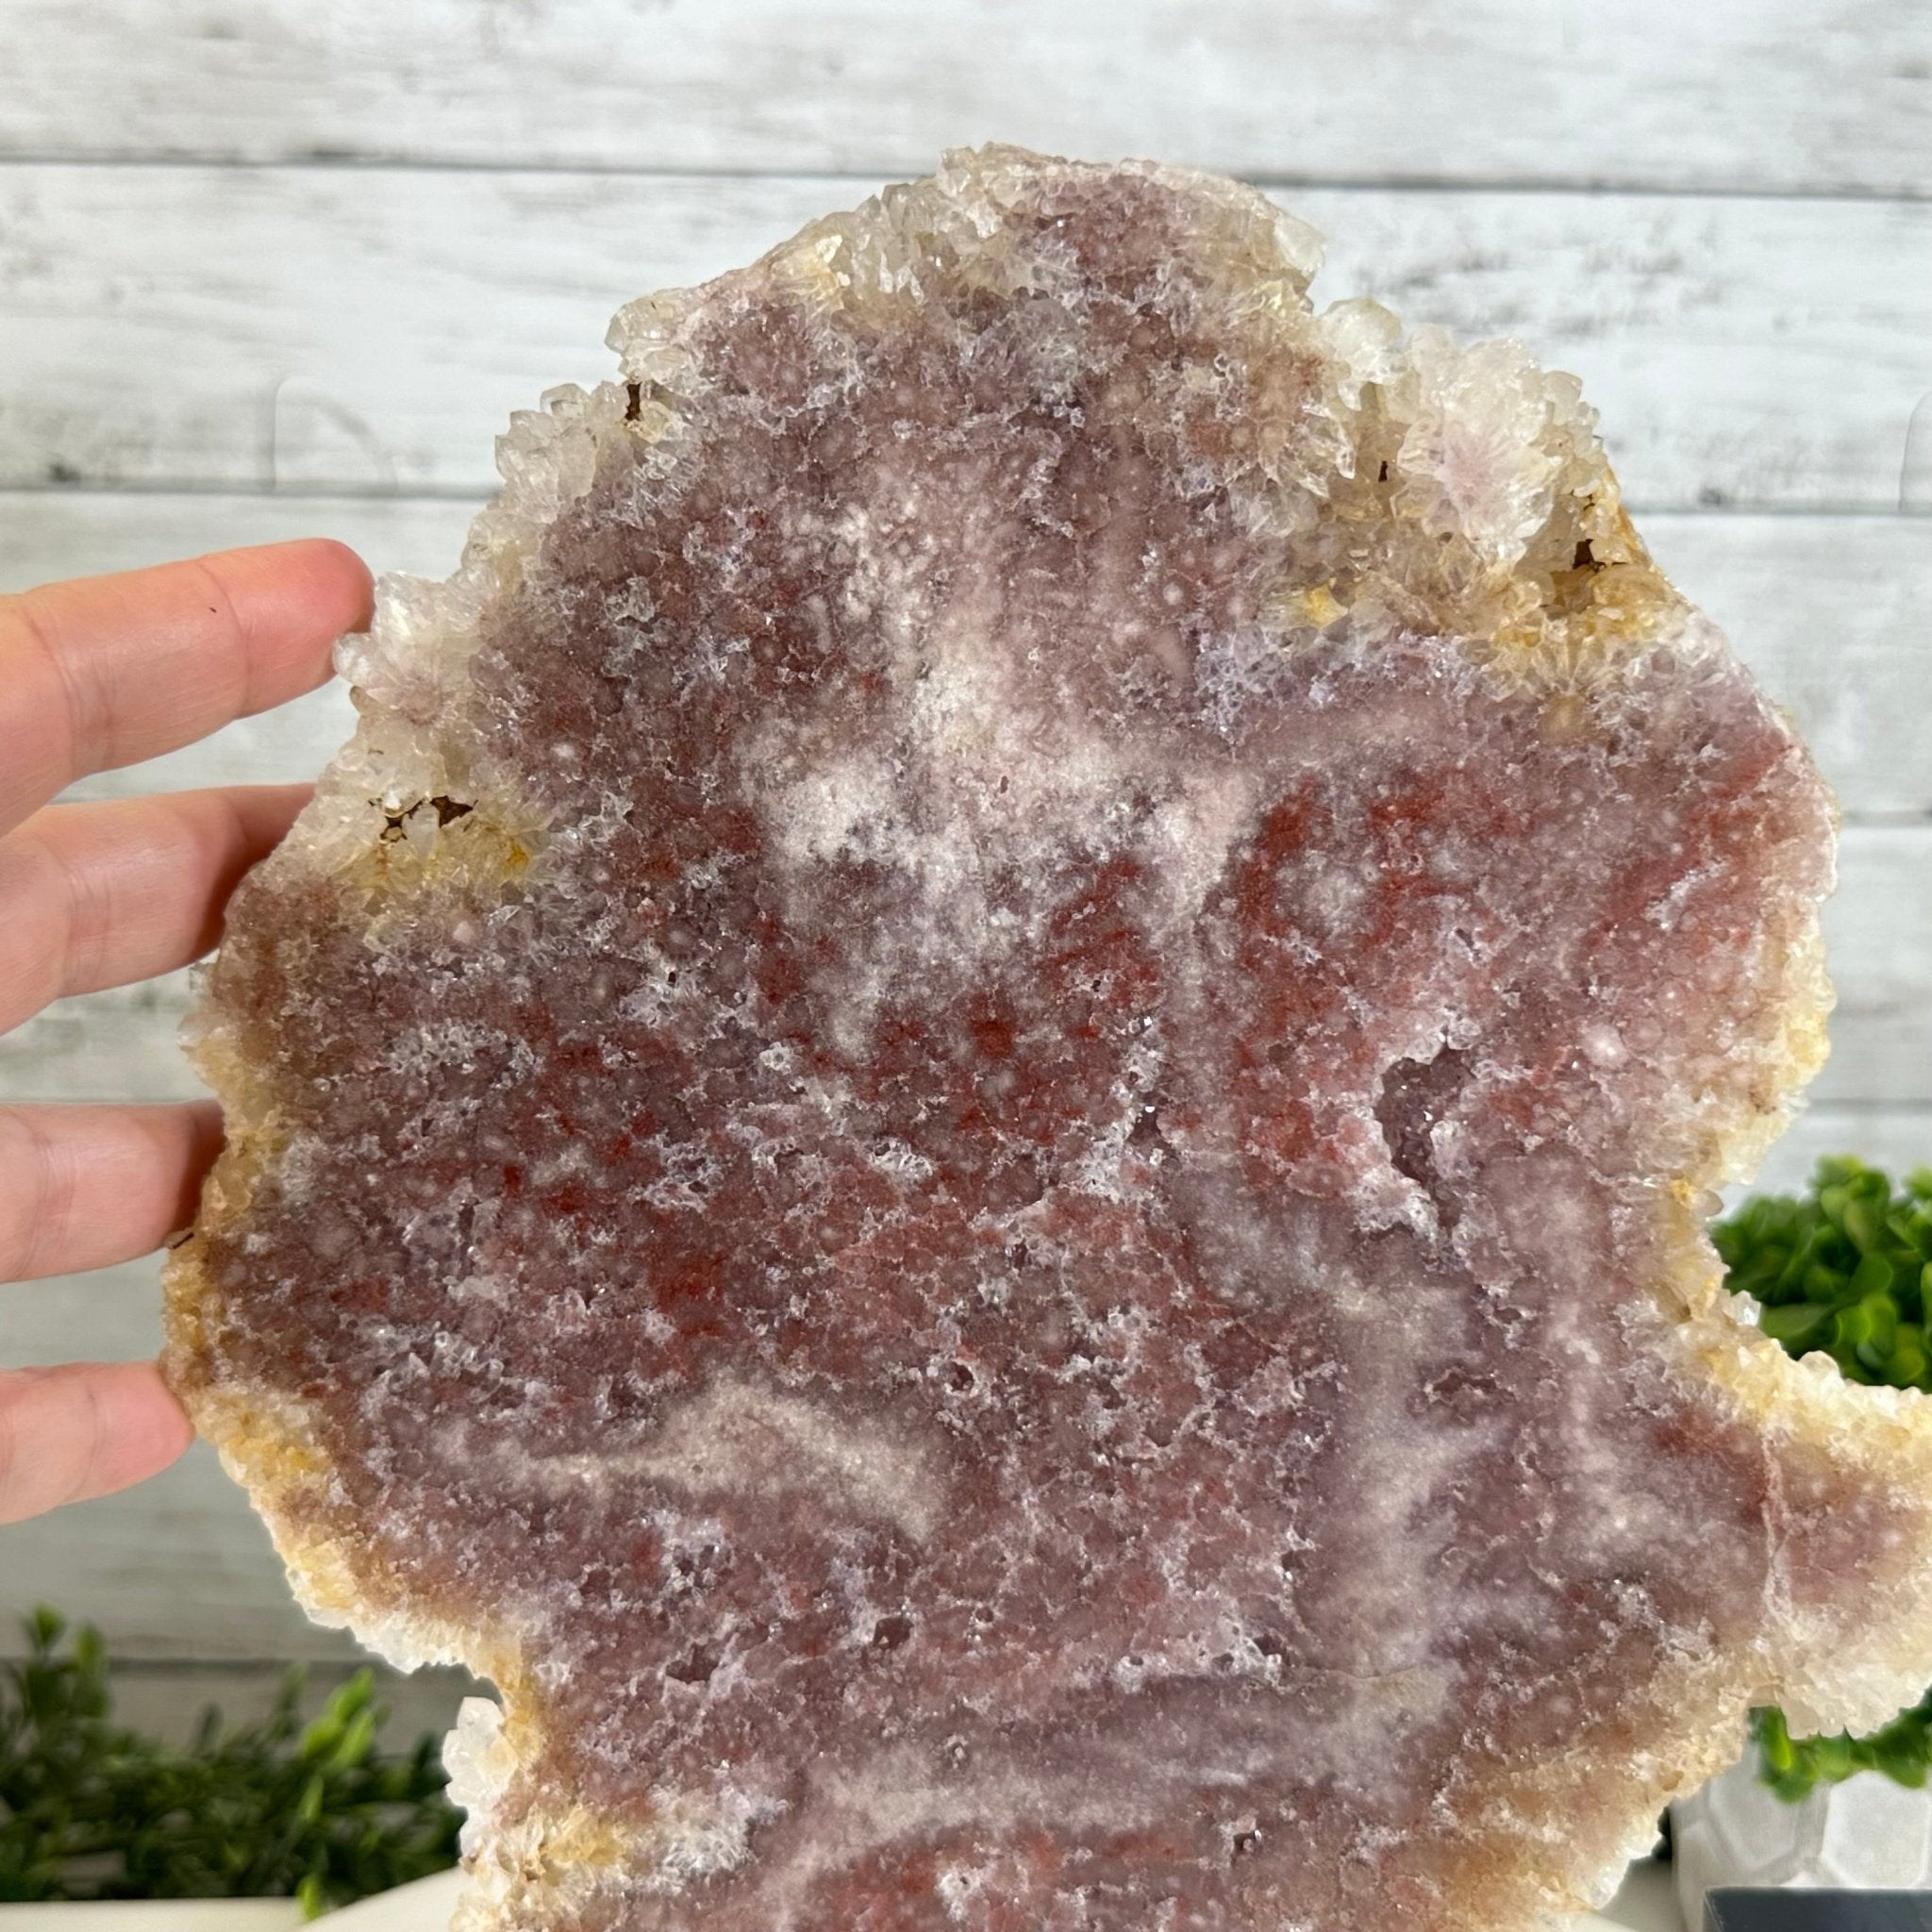 Polished Pink Amethyst Slice on a Stand, 4.4 lbs & 12.1" Tall #5743-0025 - Brazil GemsBrazil GemsPolished Pink Amethyst Slice on a Stand, 4.4 lbs & 12.1" Tall #5743-0025Slices on Fixed Bases5743-0025